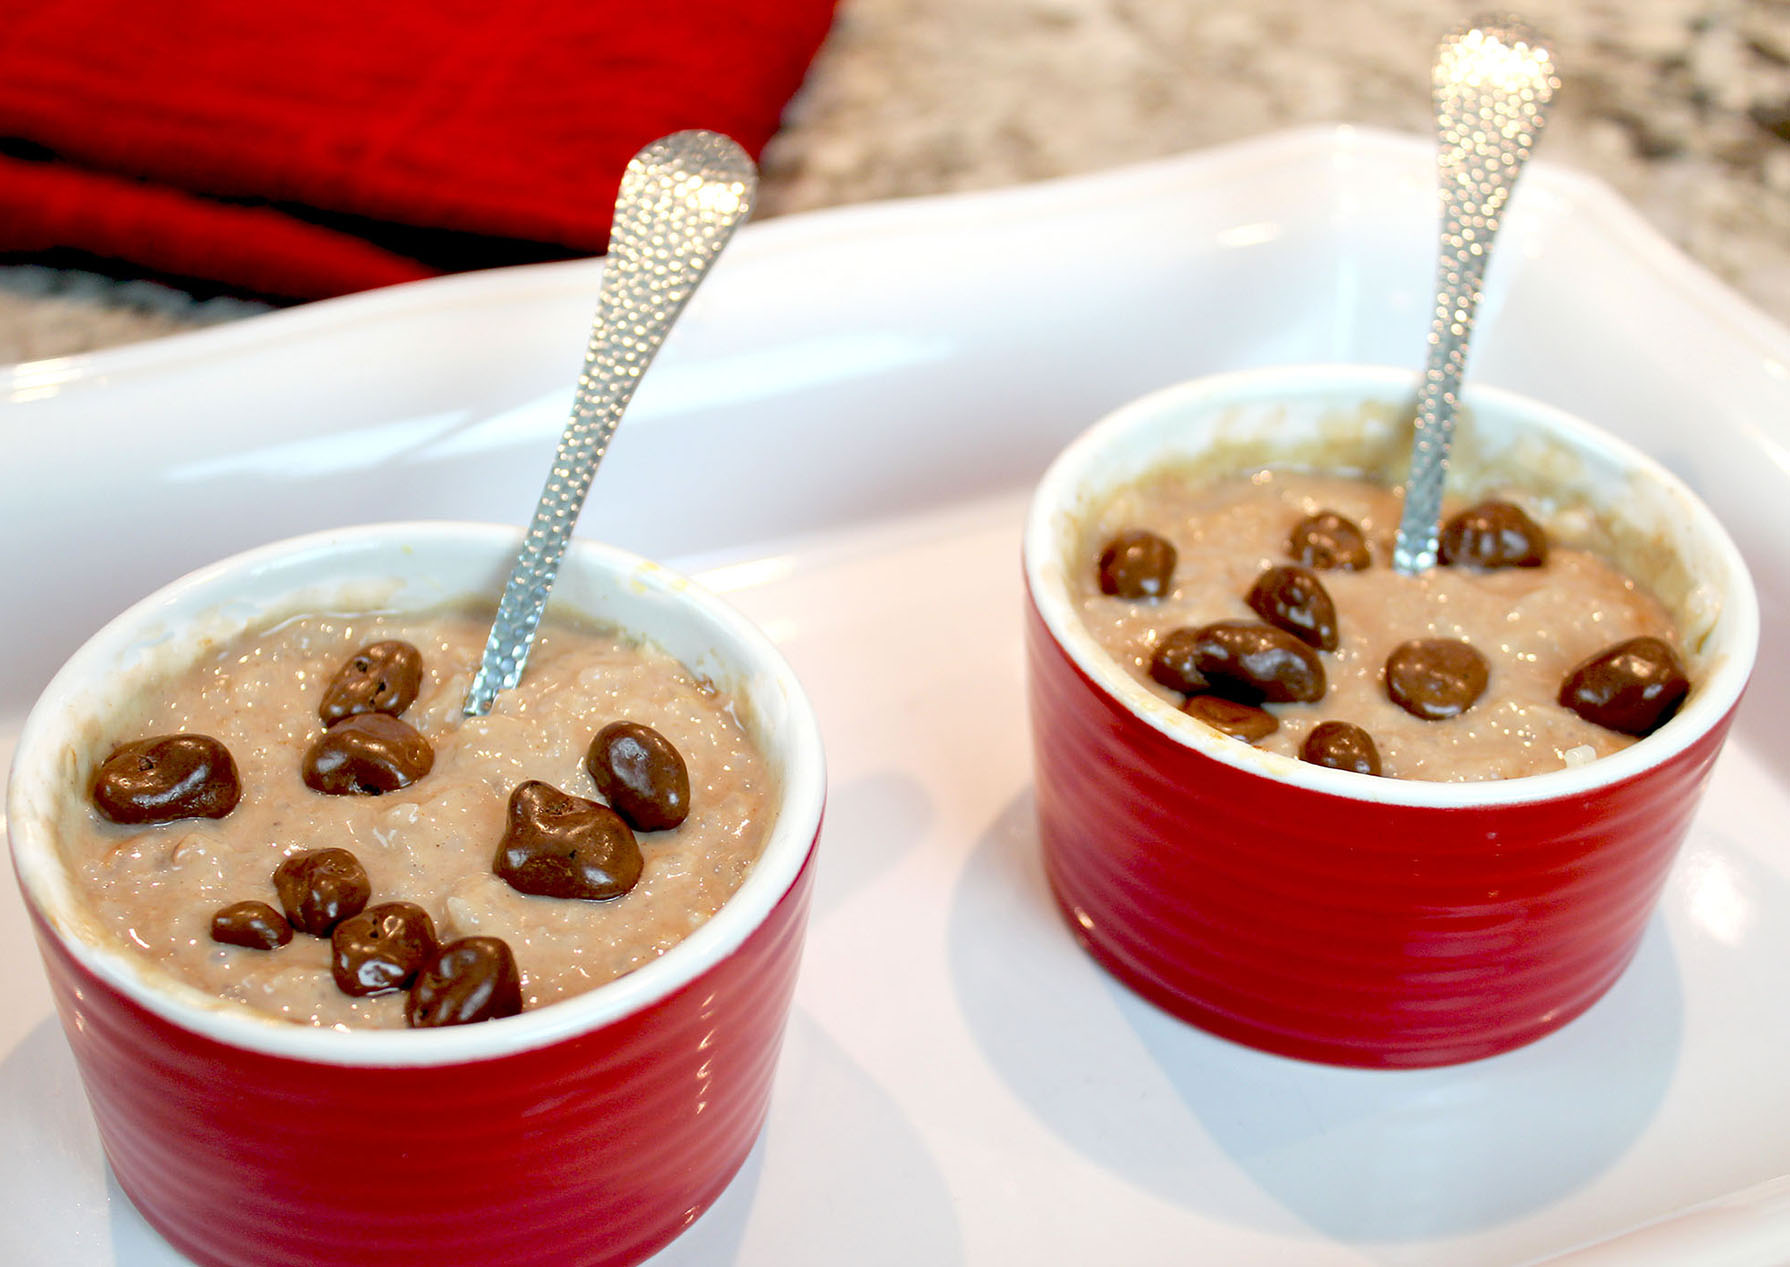 Rice pudding with chocolate covered raisons 1